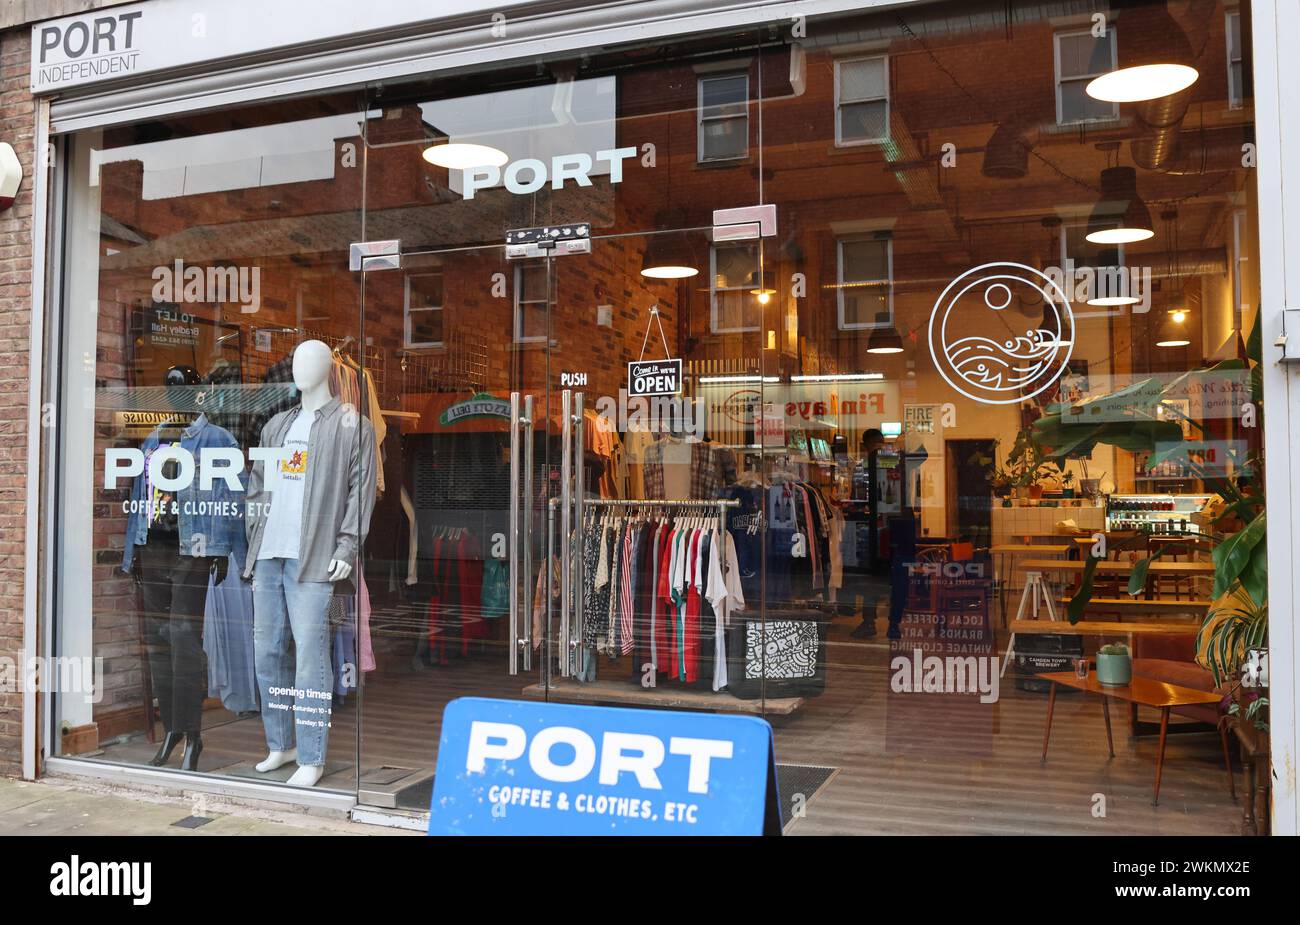 Port Independent, streetwear, vintage and lifestyle store on St Thomas Street in central Sunderland, Tyne & Wear, NE England, UK Stock Photo